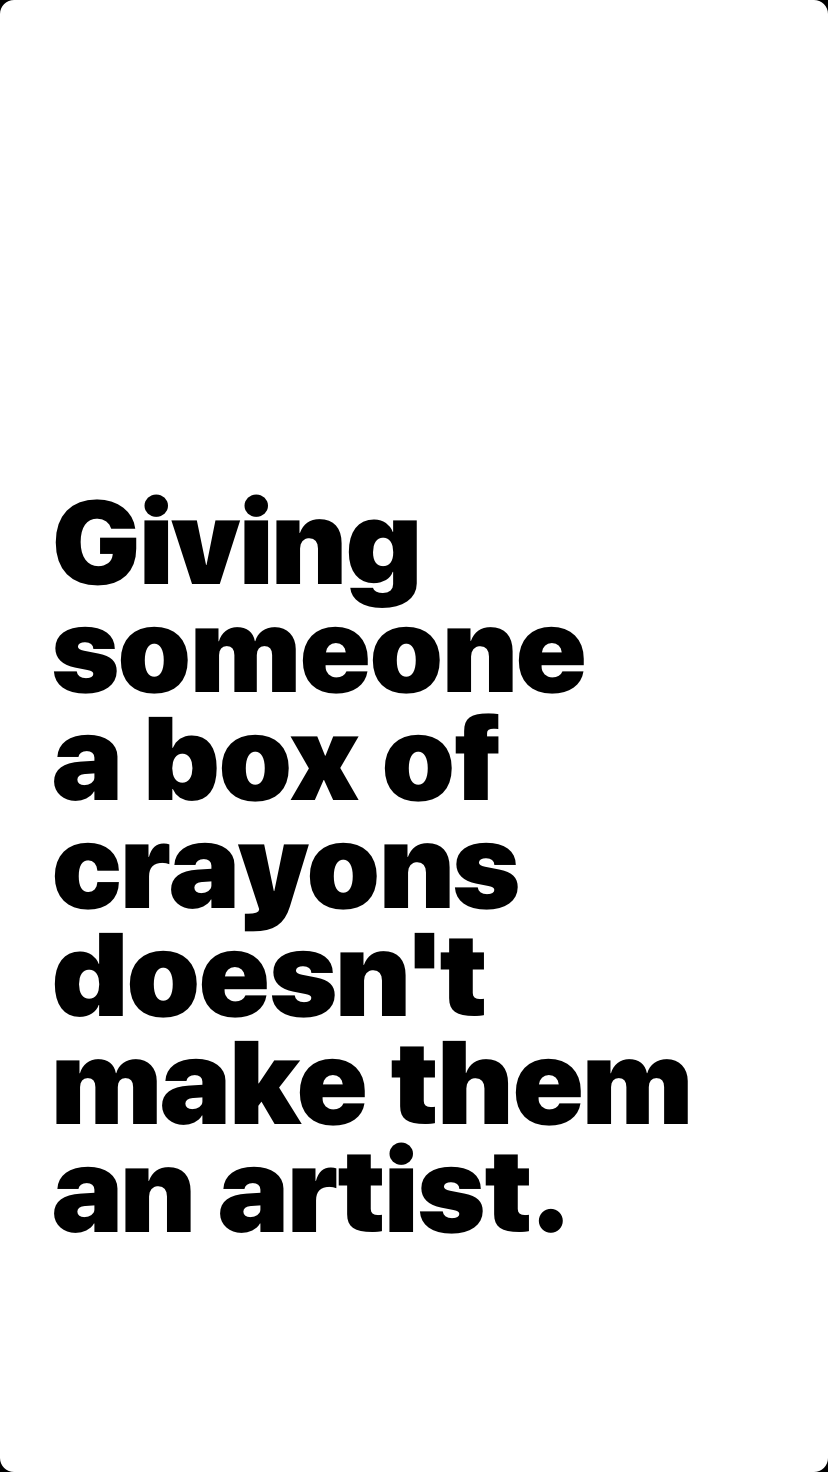 Giving someone a box of crayons doesn't make them an artist.